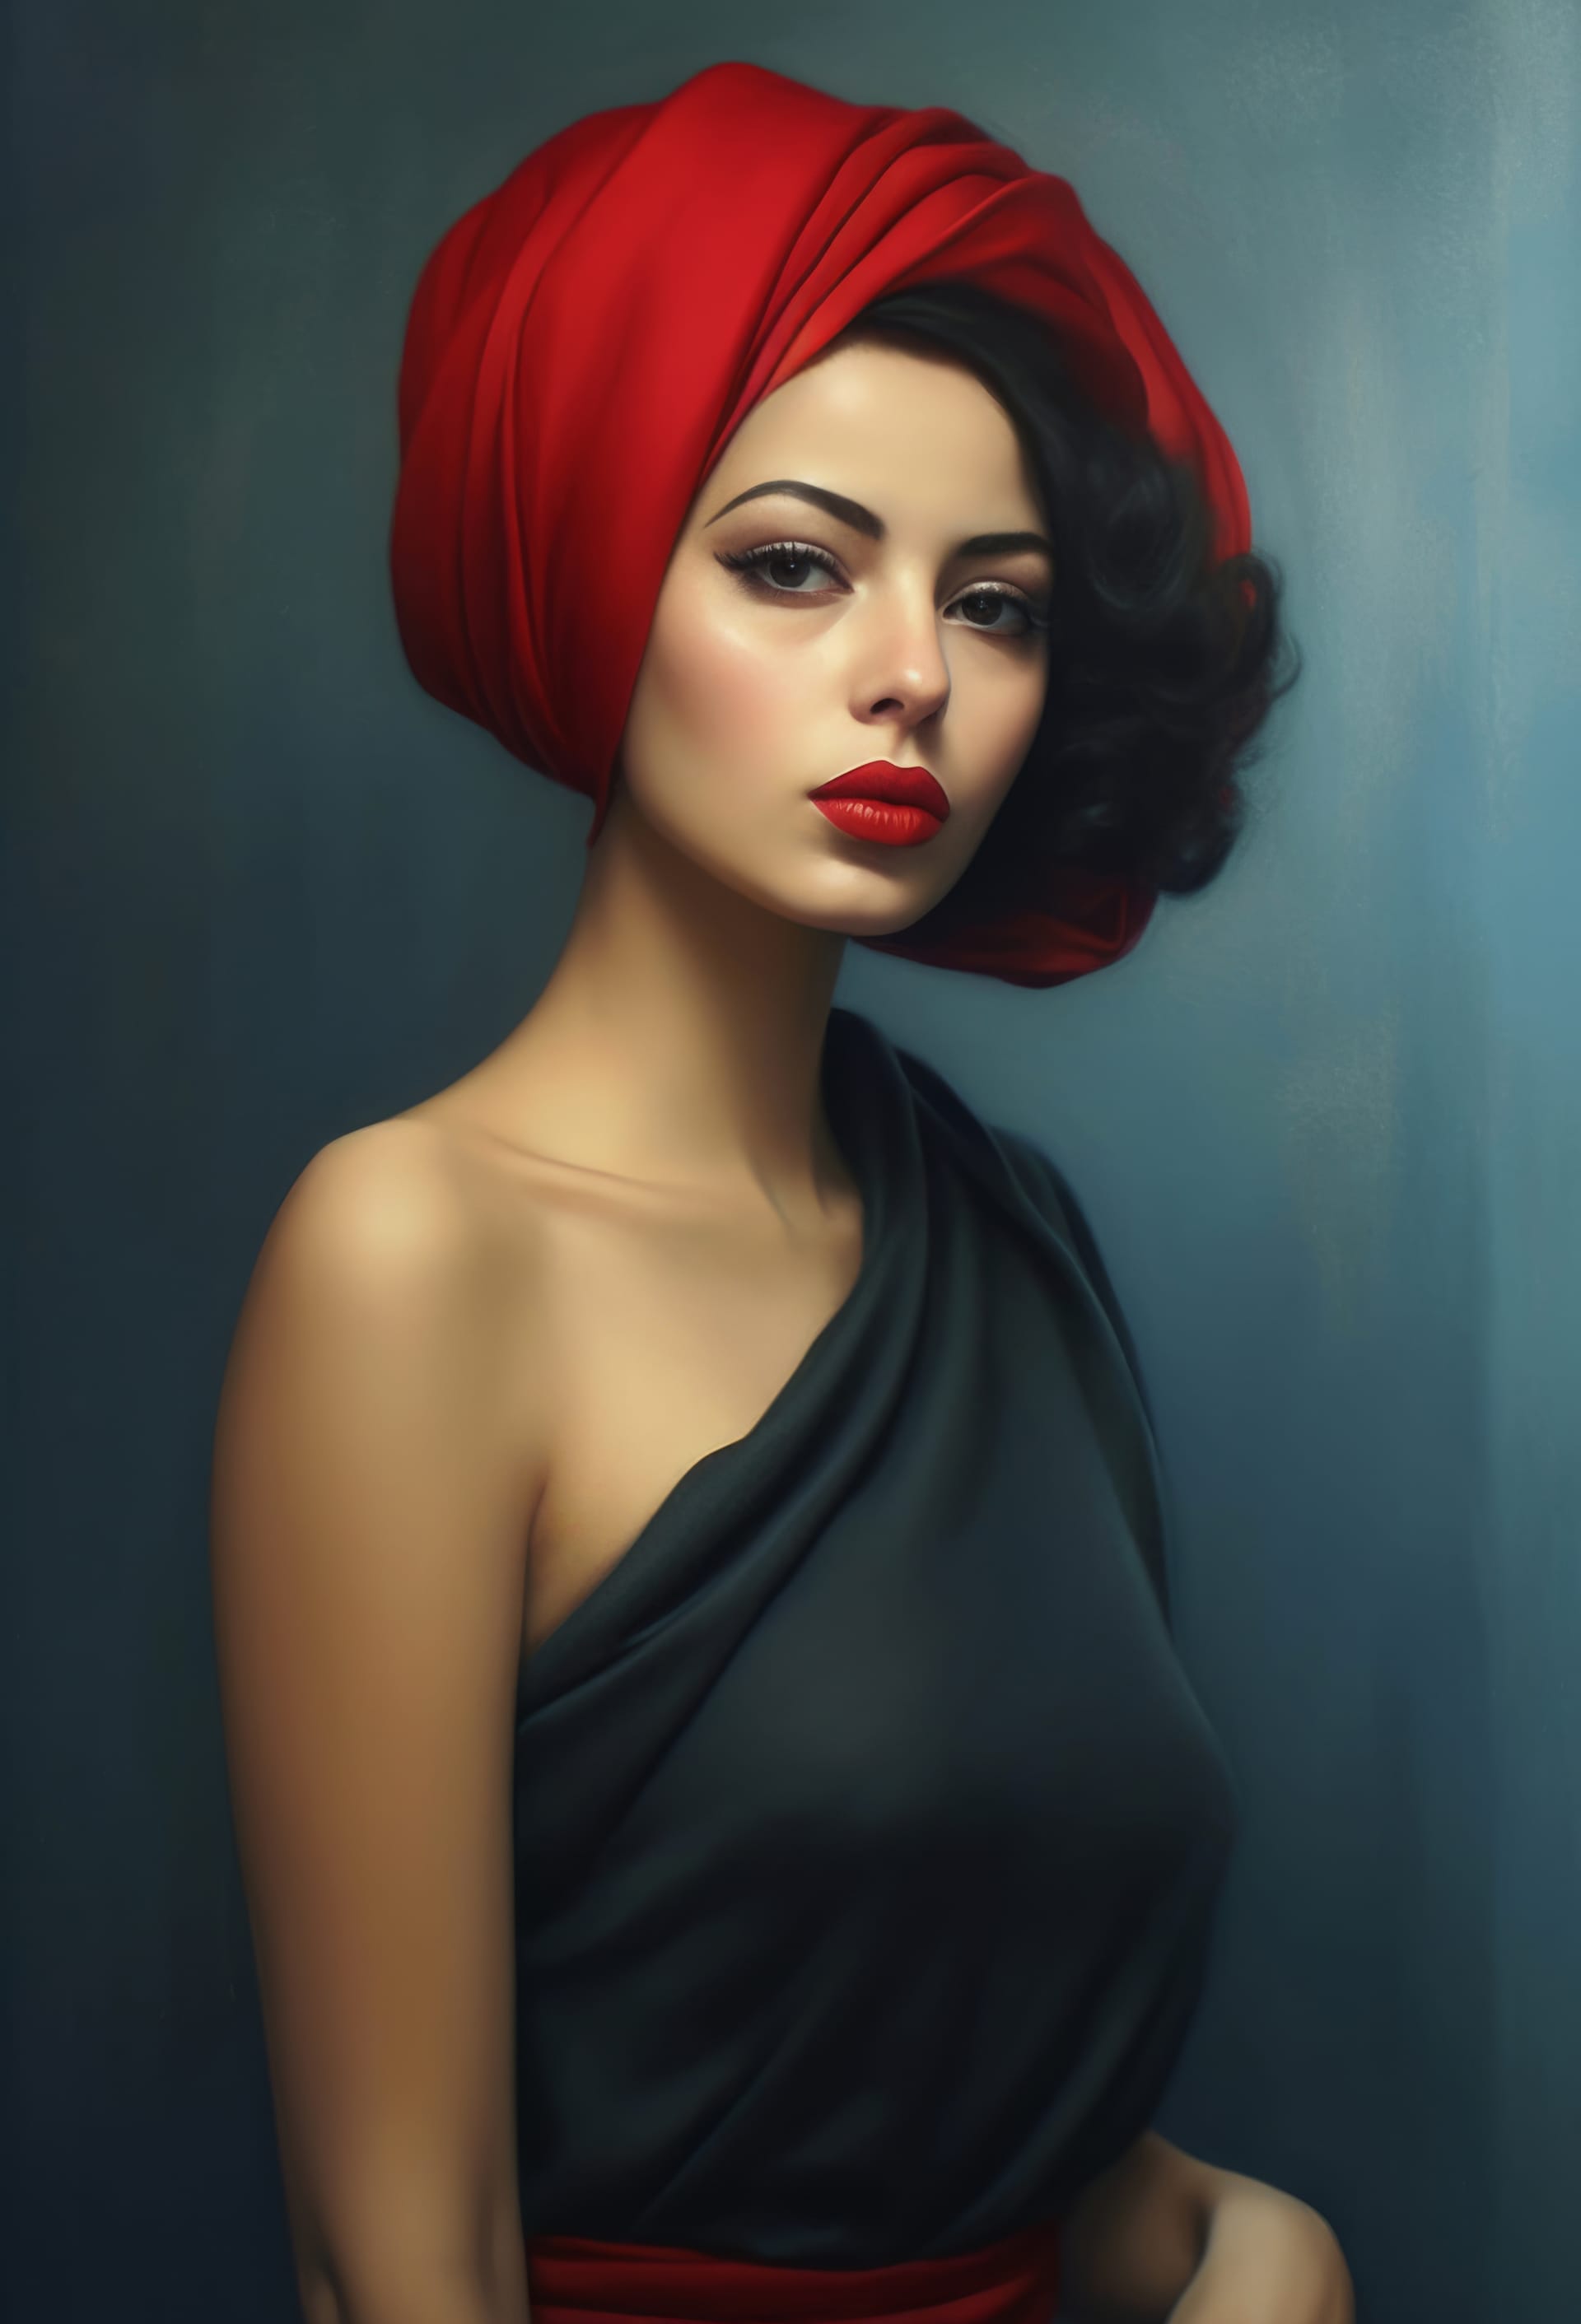 Painting woman with red turban on her head